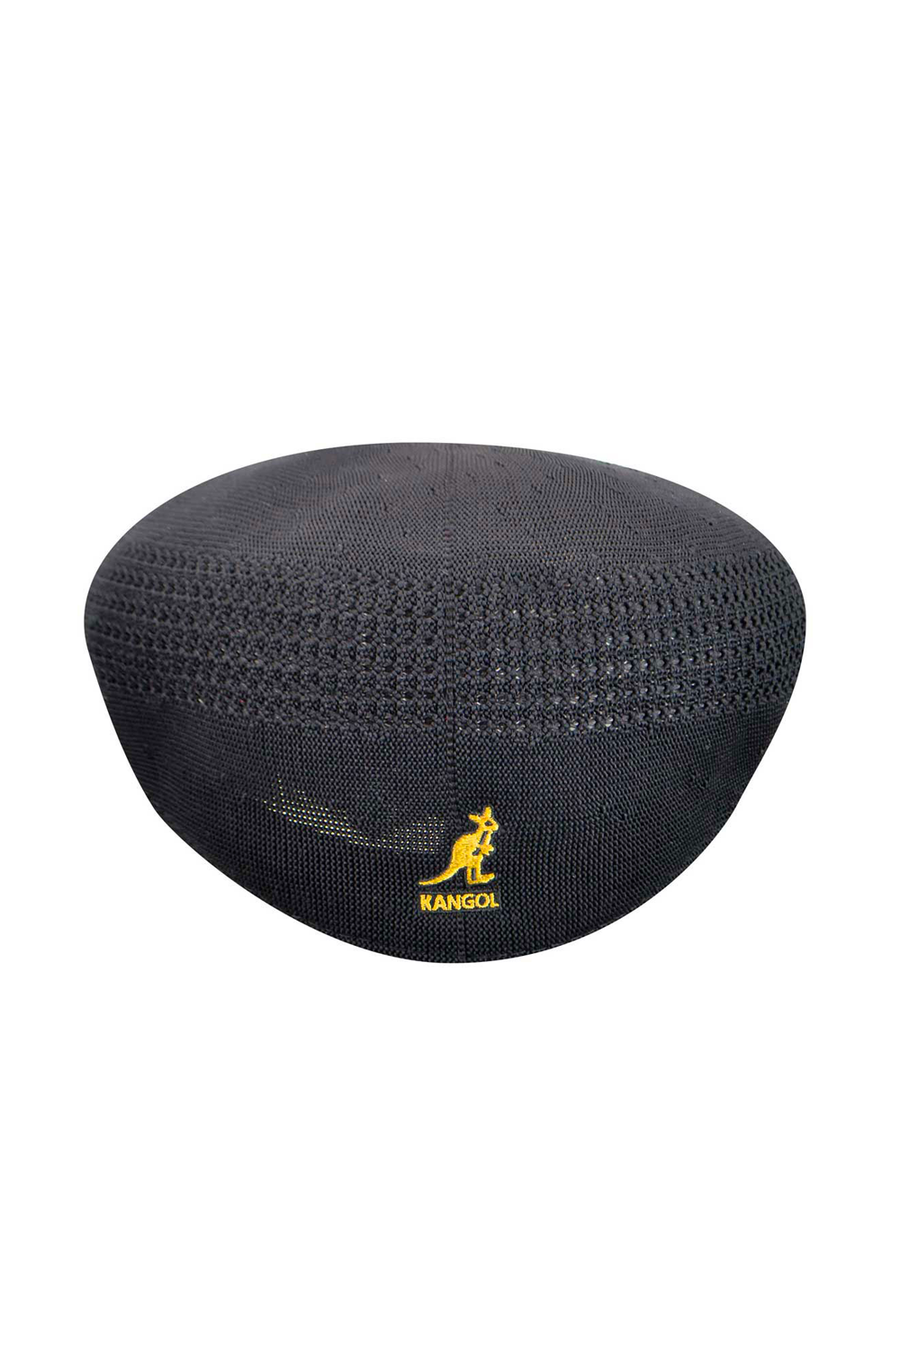 Buy the Kangol Tropic 504 Ventair Hat in Black/Gold at Intro. Spend £50 for free UK delivery. Official stockists. We ship worldwide.